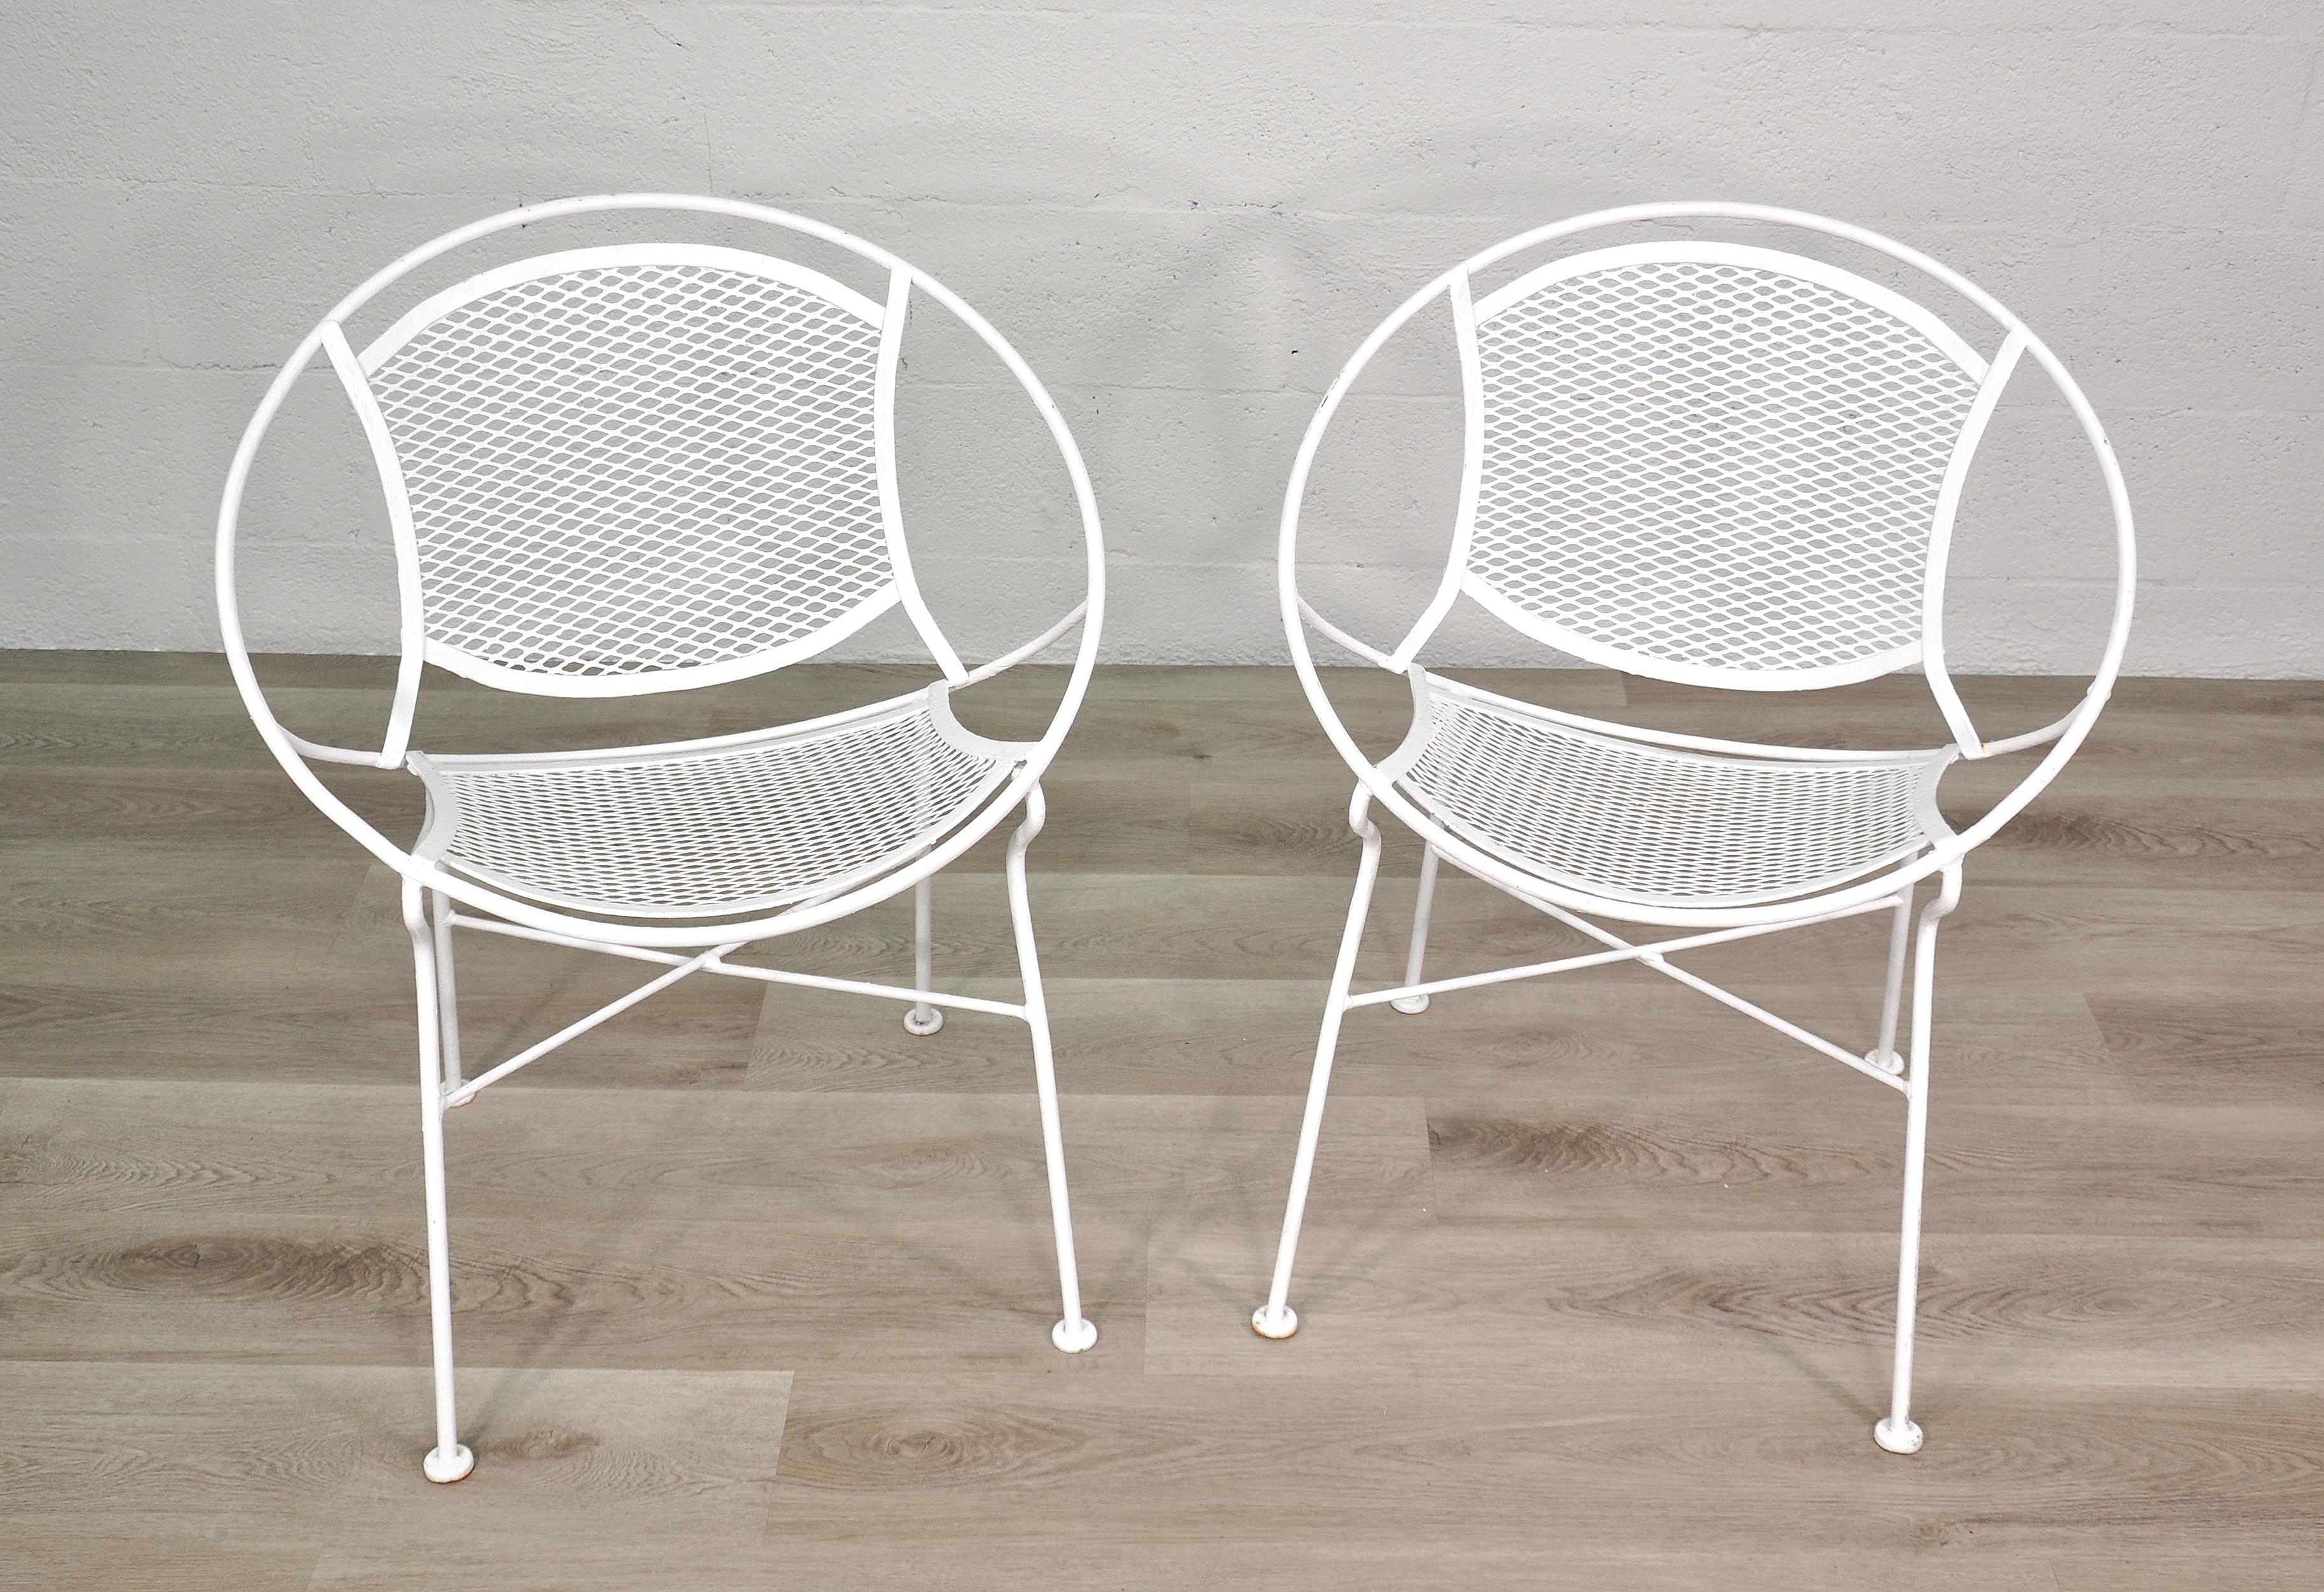 Mid-Century Modern pair of vintage white wrought iron circle or hoop outdoor chairs from the 1950s. Designed by Maurizio Tempestini for Salterini, the satellite or saucer shaped armchairs are extremely comfortable and work with any decor. Make your